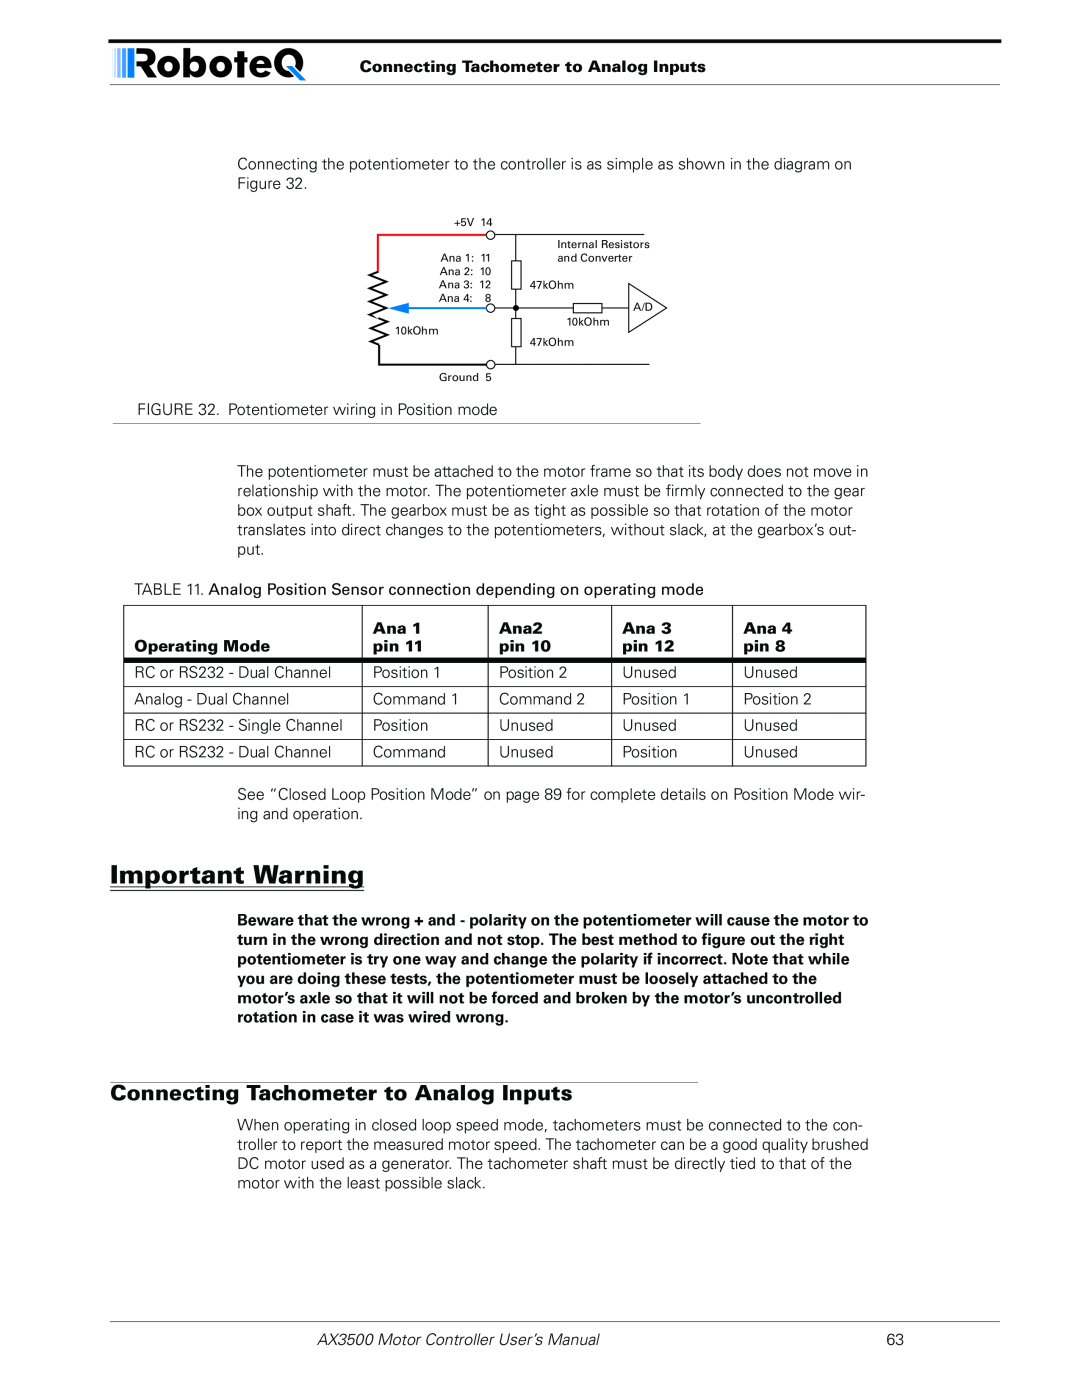 RoboteQ AX3500 user manual Connecting Tachometer to Analog Inputs, Important Warning, Ana2, Operating Mode 